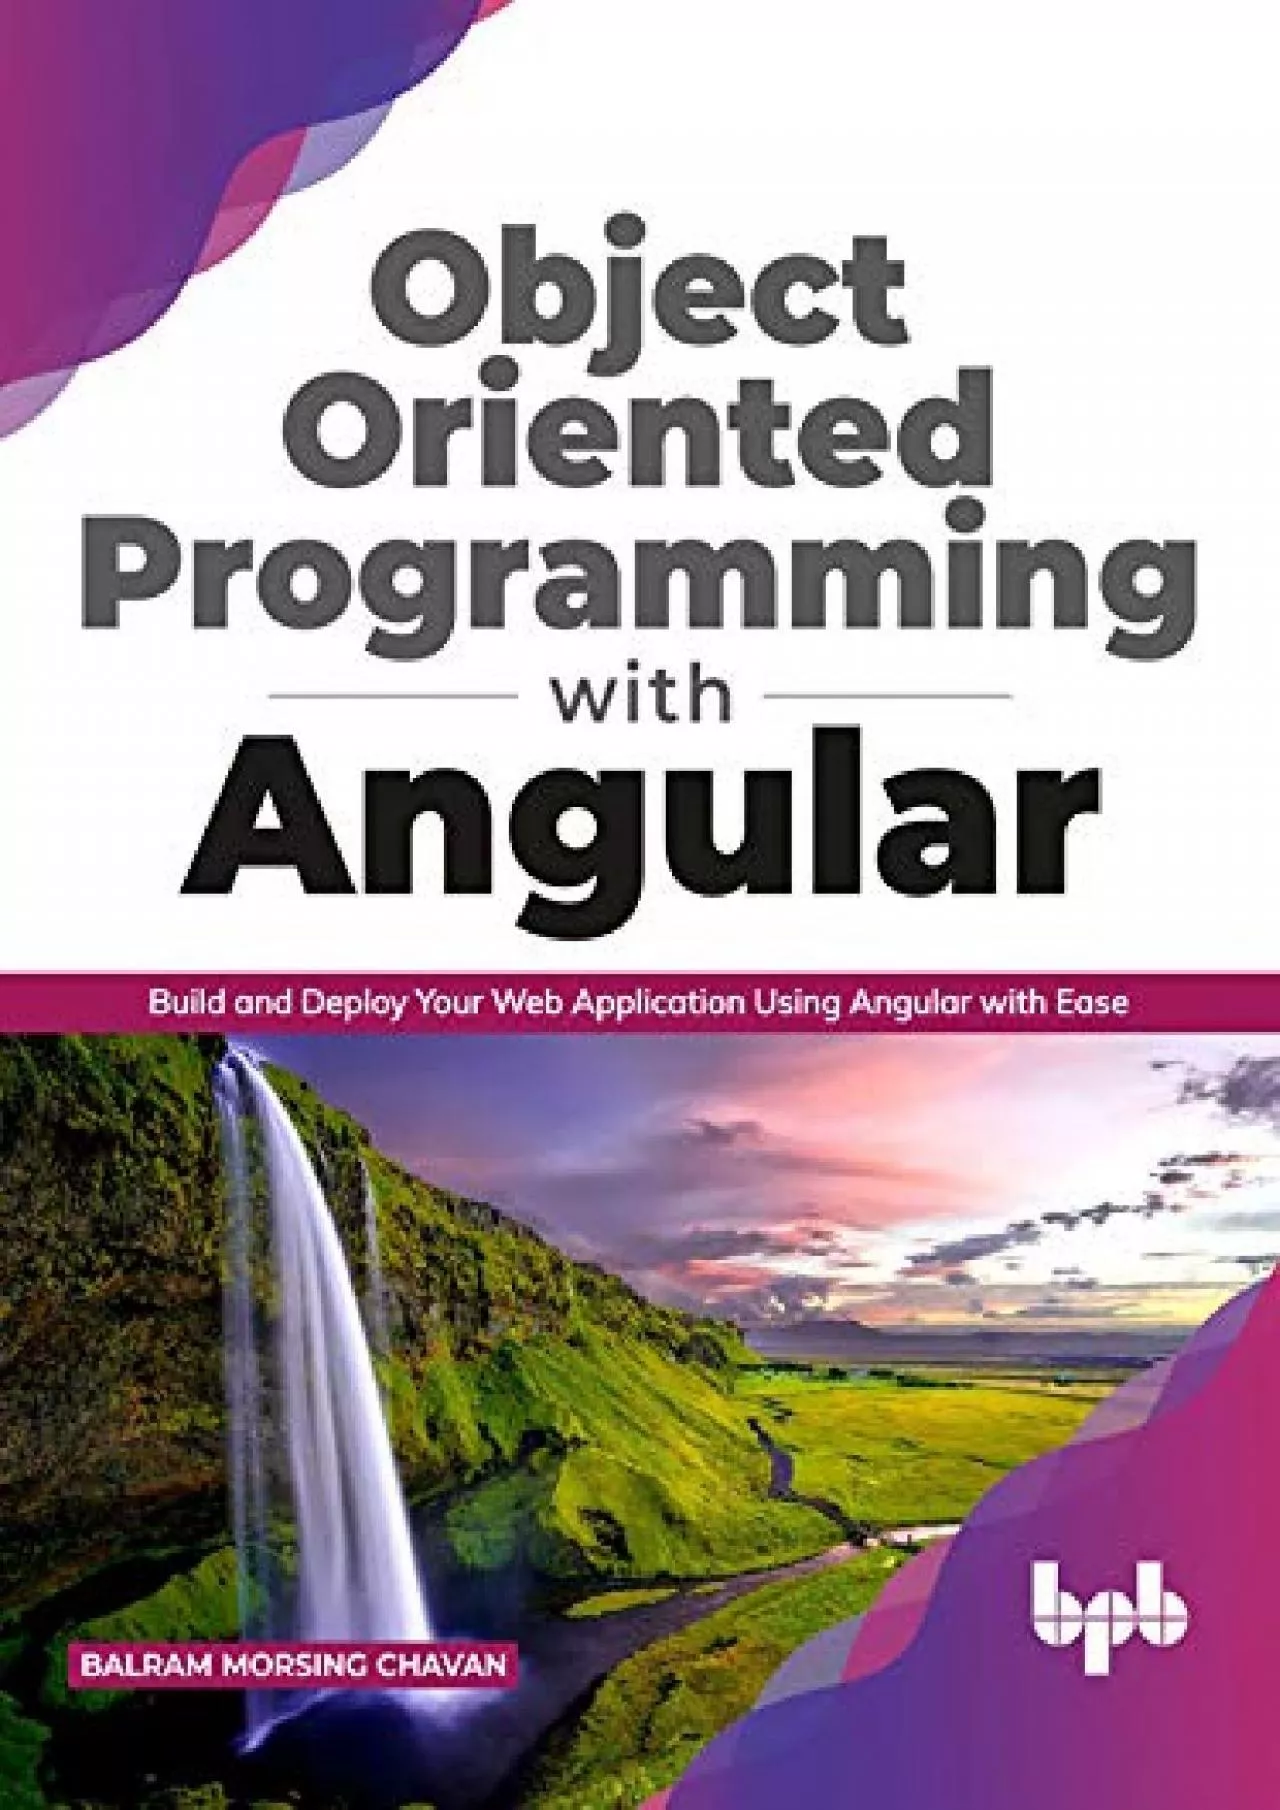 [READING BOOK]-Object Oriented Programming with Angular: Build and Deploy Your Web Application